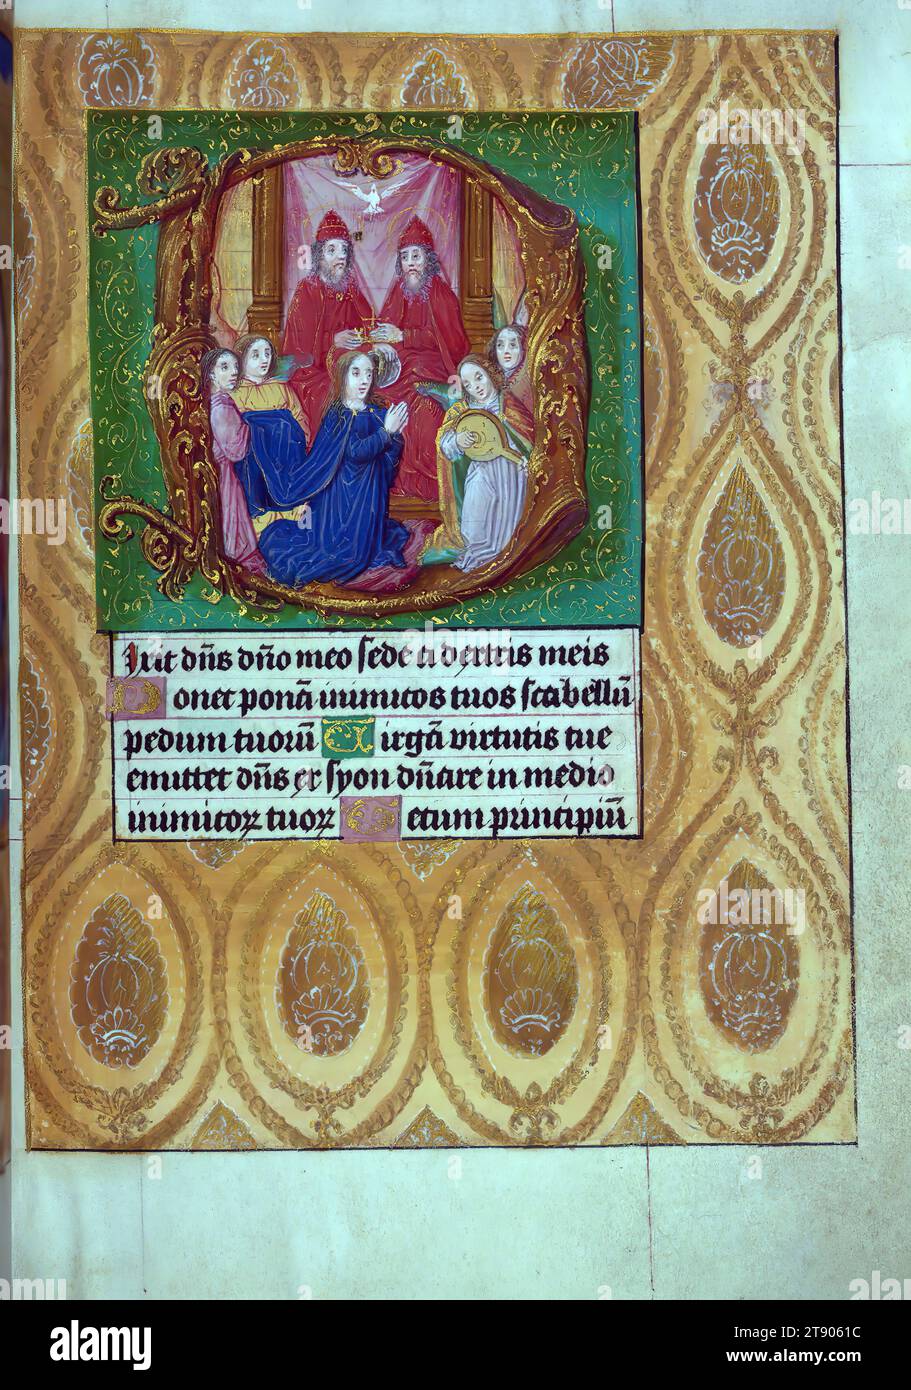 Aussem Hours, Coronation of the Virgin, This early sixteenth-century book of hours was made for the Aussem family in Cologne, Germany, a provenance proclaimed through family heraldry within the manuscript, as well as the arms of Cologne stamped on its original leather binding. Lavishly illuminated throughout with full-page miniatures and historiated initials, the manuscript is just as notable for the marginal decorations that surround the figurative scenes. Illusionistic jewelry, architecture, texts, flowers, and insects abound Stock Photo